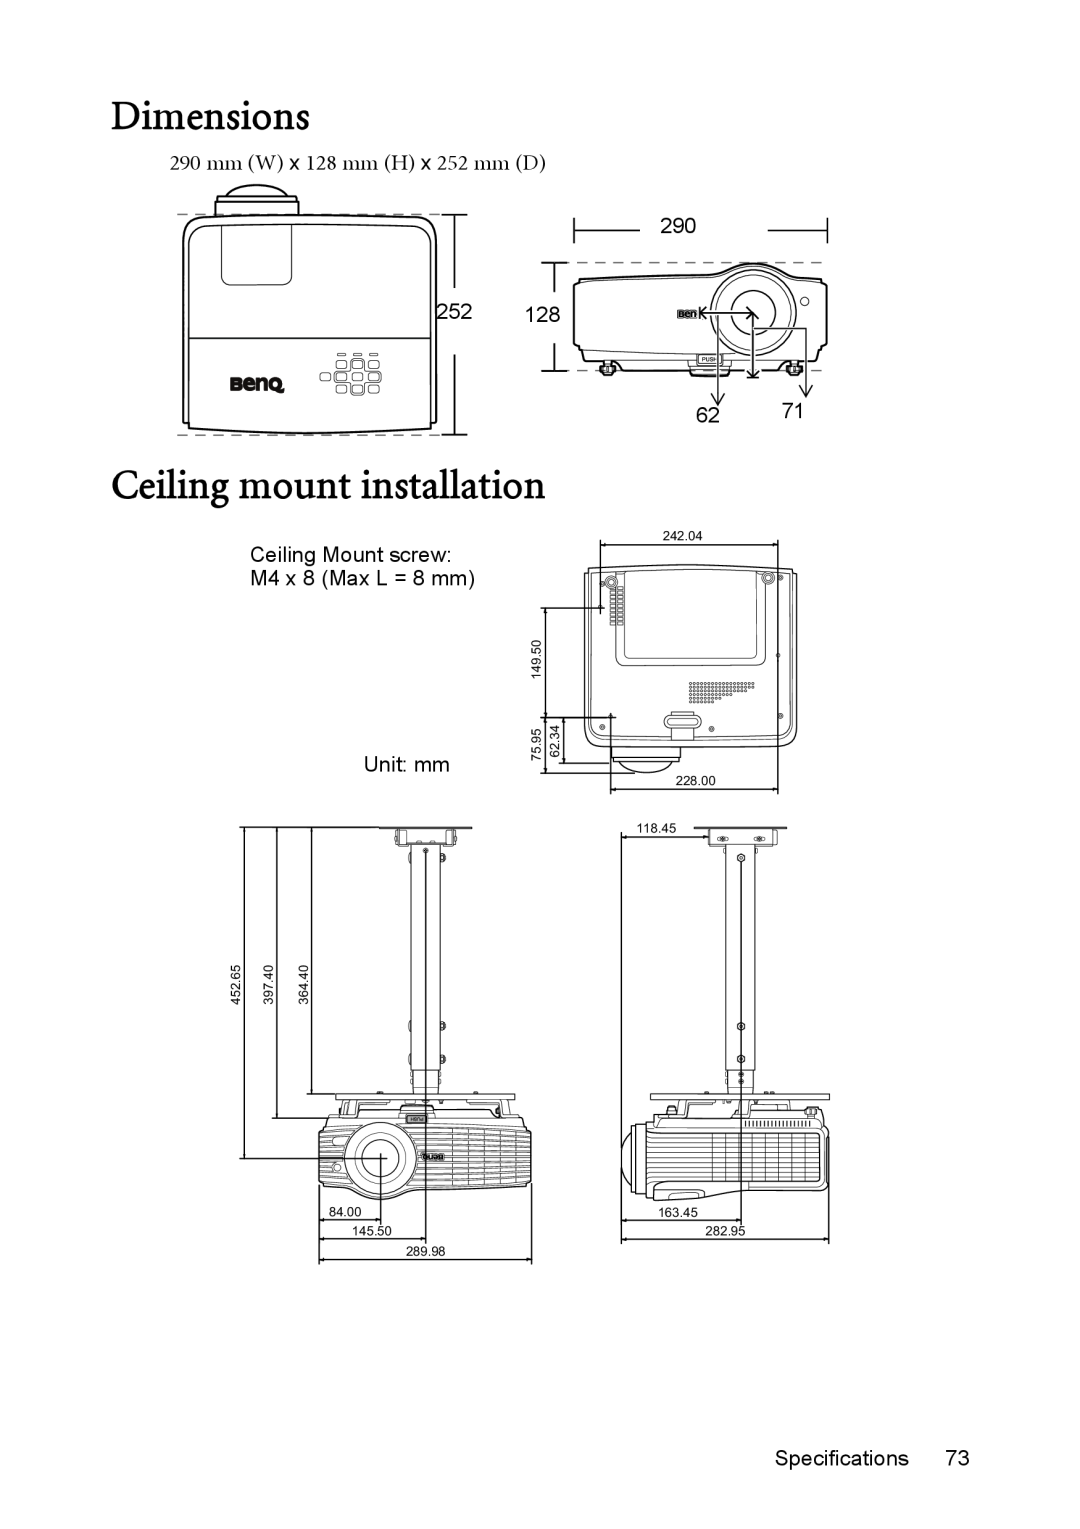 BenQ MX812ST, MW811ST user manual Dimensions, Ceiling mount installation, mm W x 128 mm H x 252 mm D 290 252, Specifications 